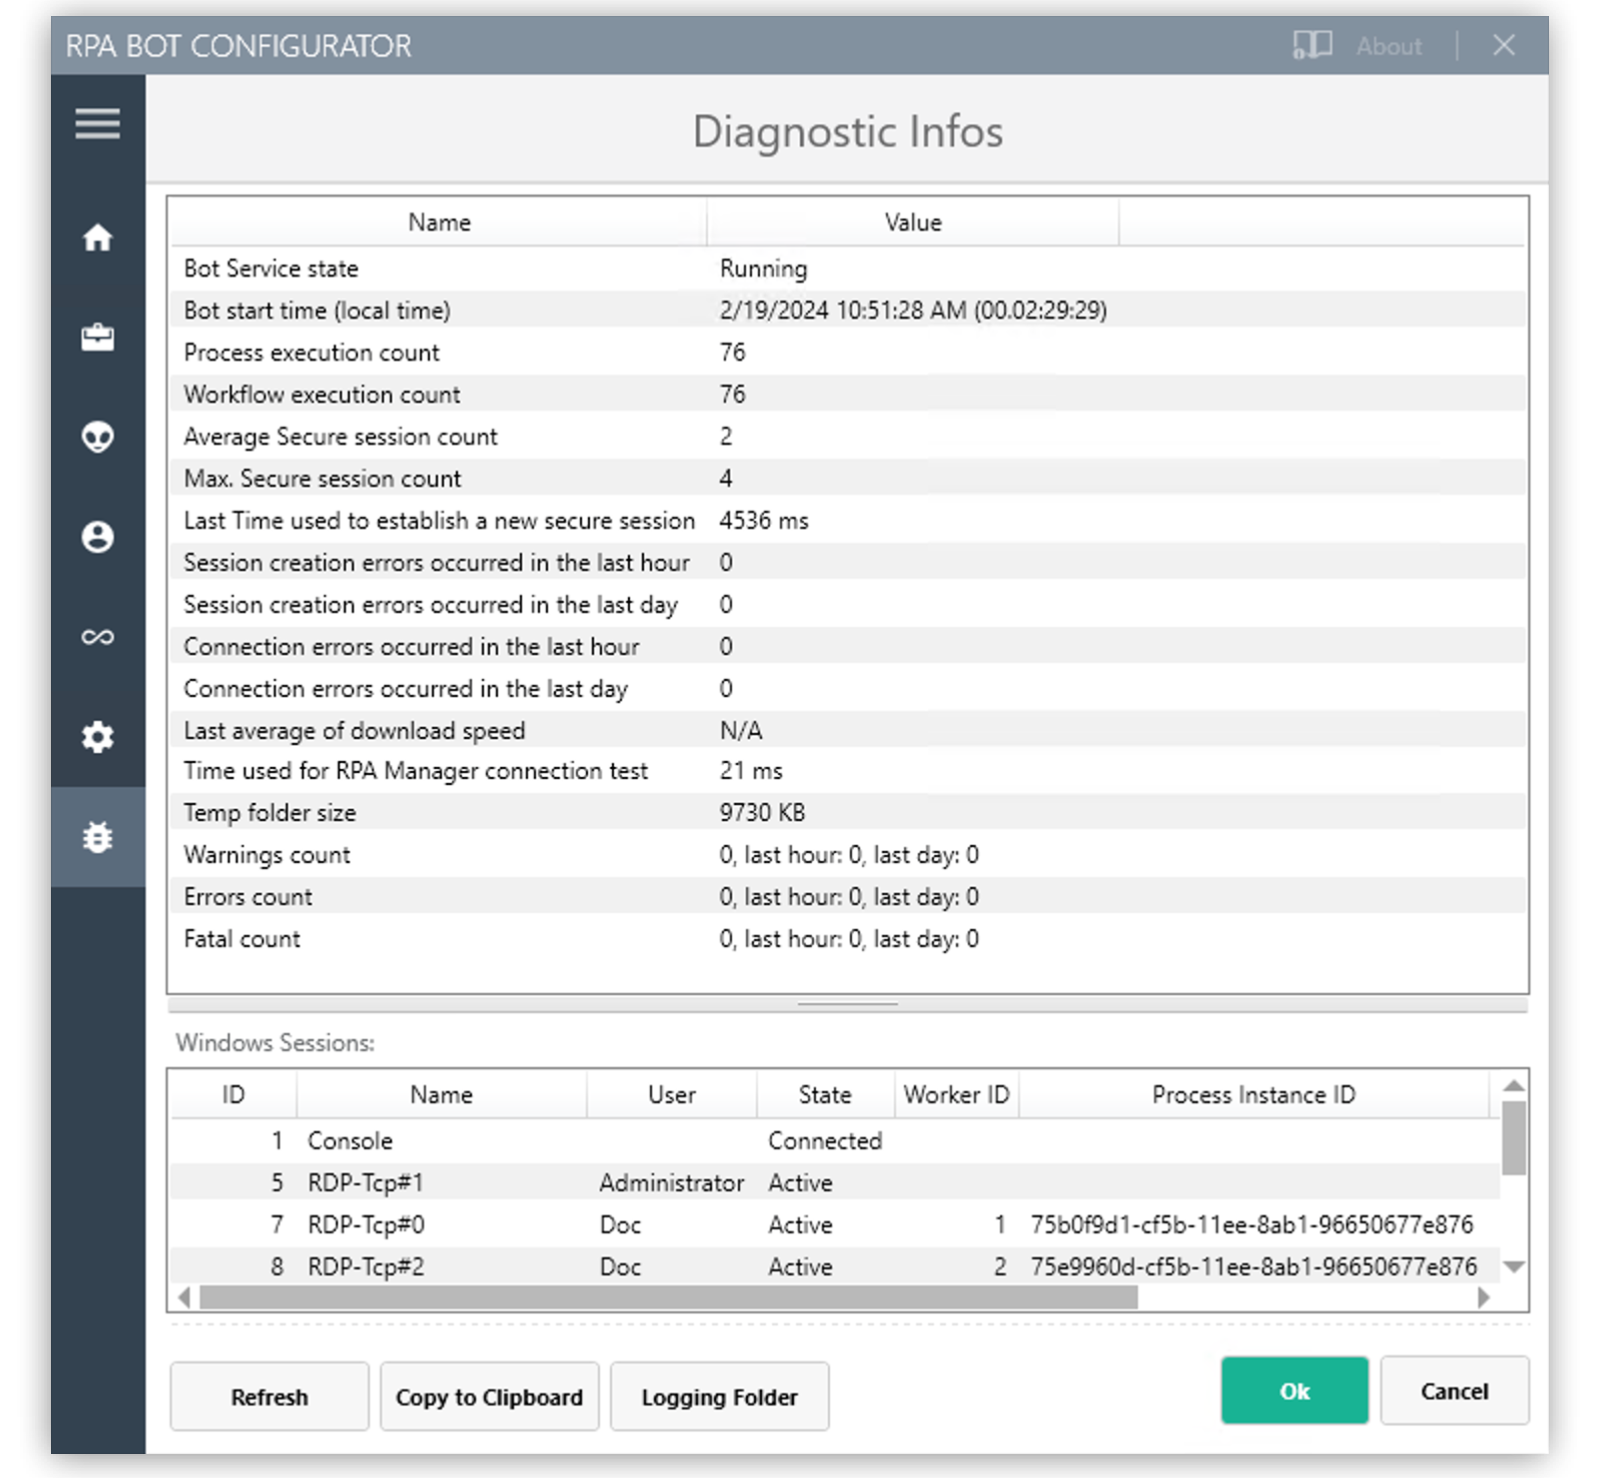 The RPA Bot Configurator application showing the Diagnostic Infos panel